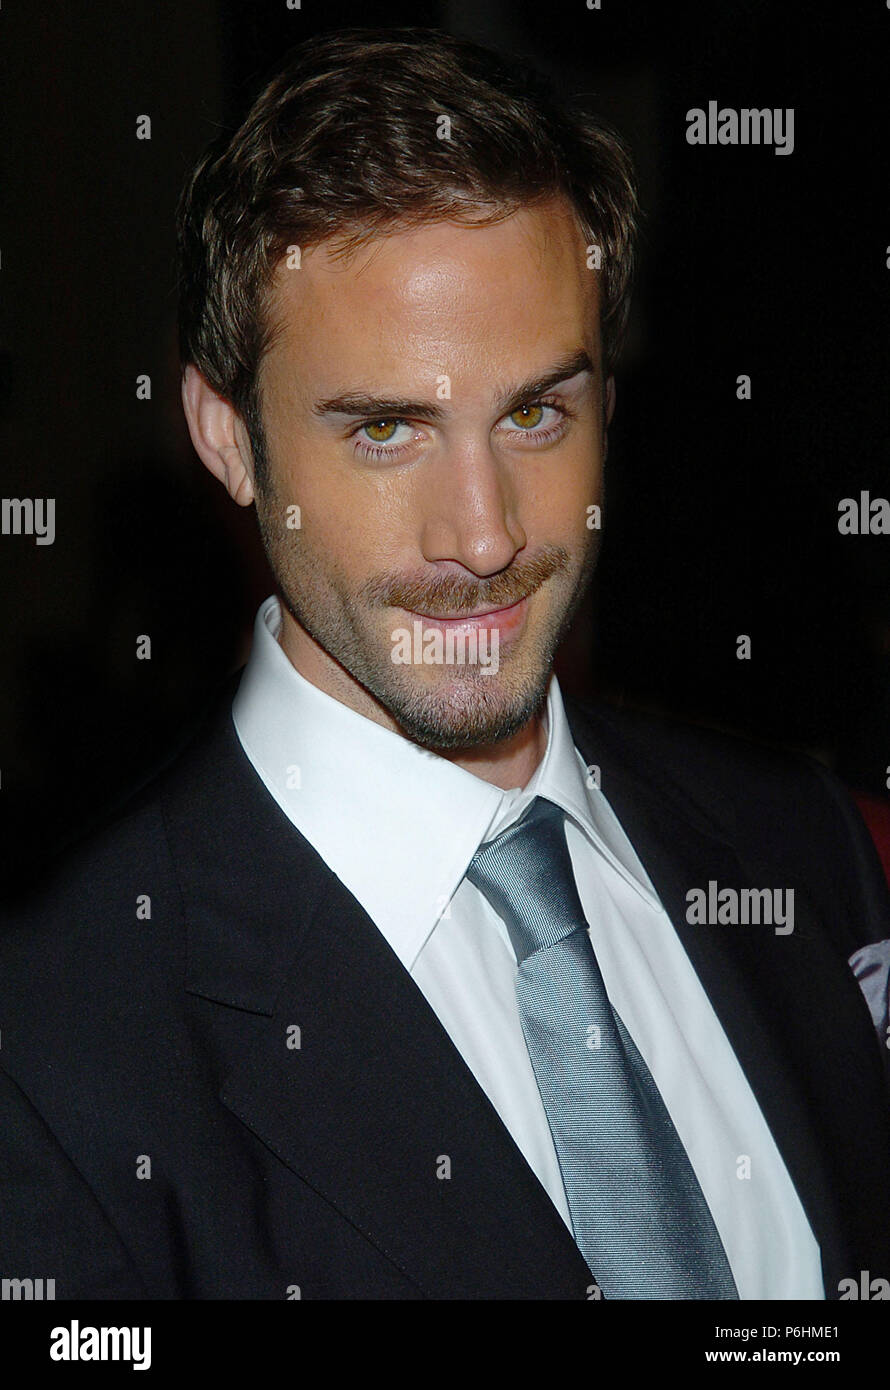 Joseph Fiennes arriving at The Merchand Of Venice at The AFI Film Festival at the Arclight Theatre in Los Angeles. November 9, 2004.01-FiennesJoseph031 Red Carpet Event, Vertical, USA, Film Industry, Celebrities,  Photography, Bestof, Arts Culture and Entertainment, Topix Celebrities fashion /  Vertical, Best of, Event in Hollywood Life - California,  Red Carpet and backstage, USA, Film Industry, Celebrities,  movie celebrities, TV celebrities, Music celebrities, Photography, Bestof, Arts Culture and Entertainment,  Topix, headshot, vertical, one person,, from the year , 2004, inquiry tsuni@Ga Stock Photo